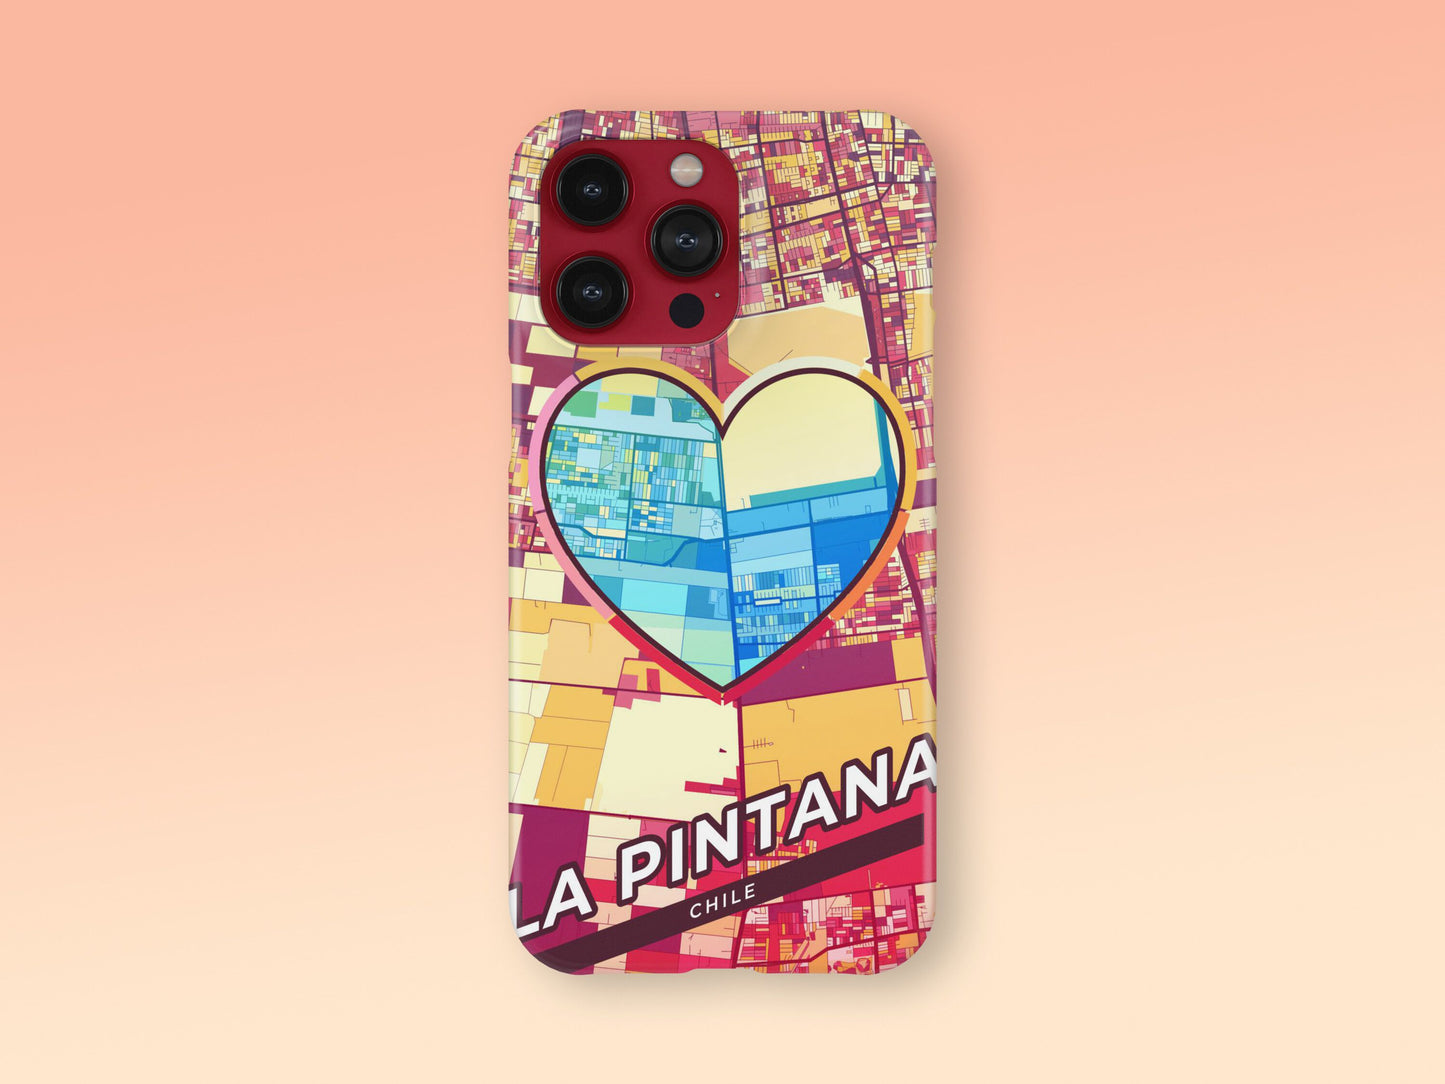 La Pintana Chile slim phone case with colorful icon. Birthday, wedding or housewarming gift. Couple match cases. 2